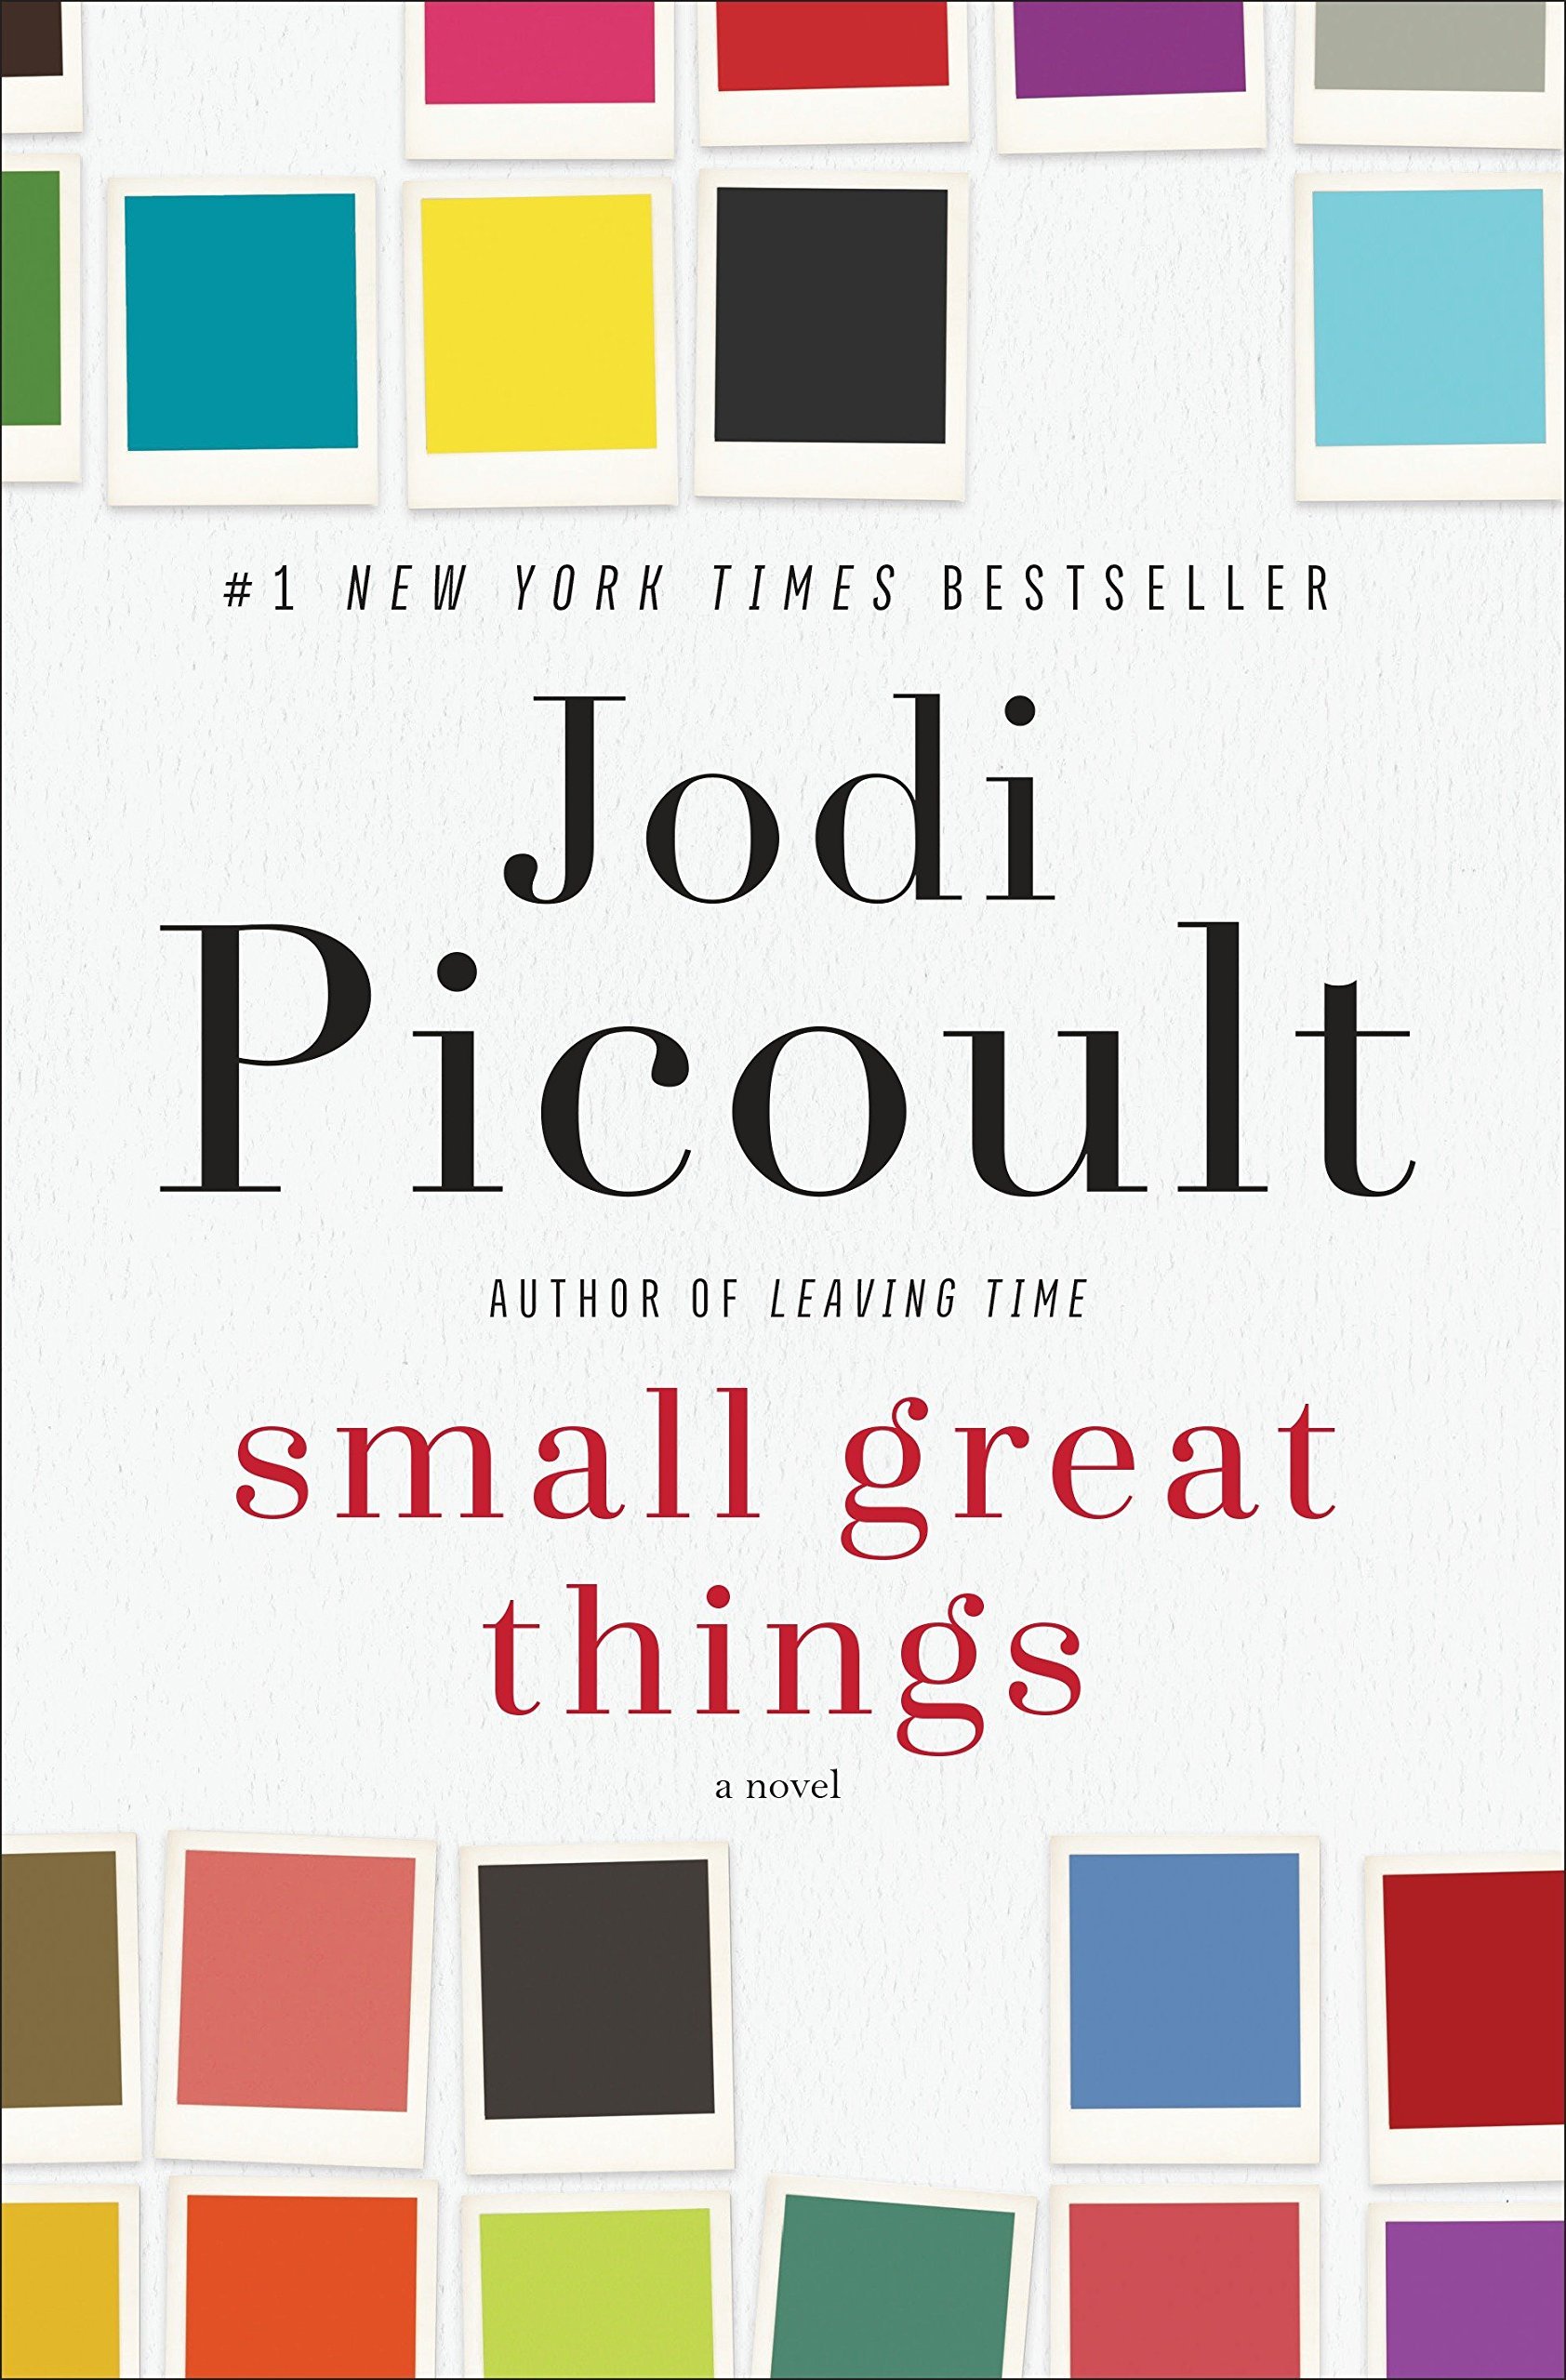 Small Great Things by Picoult.jpg